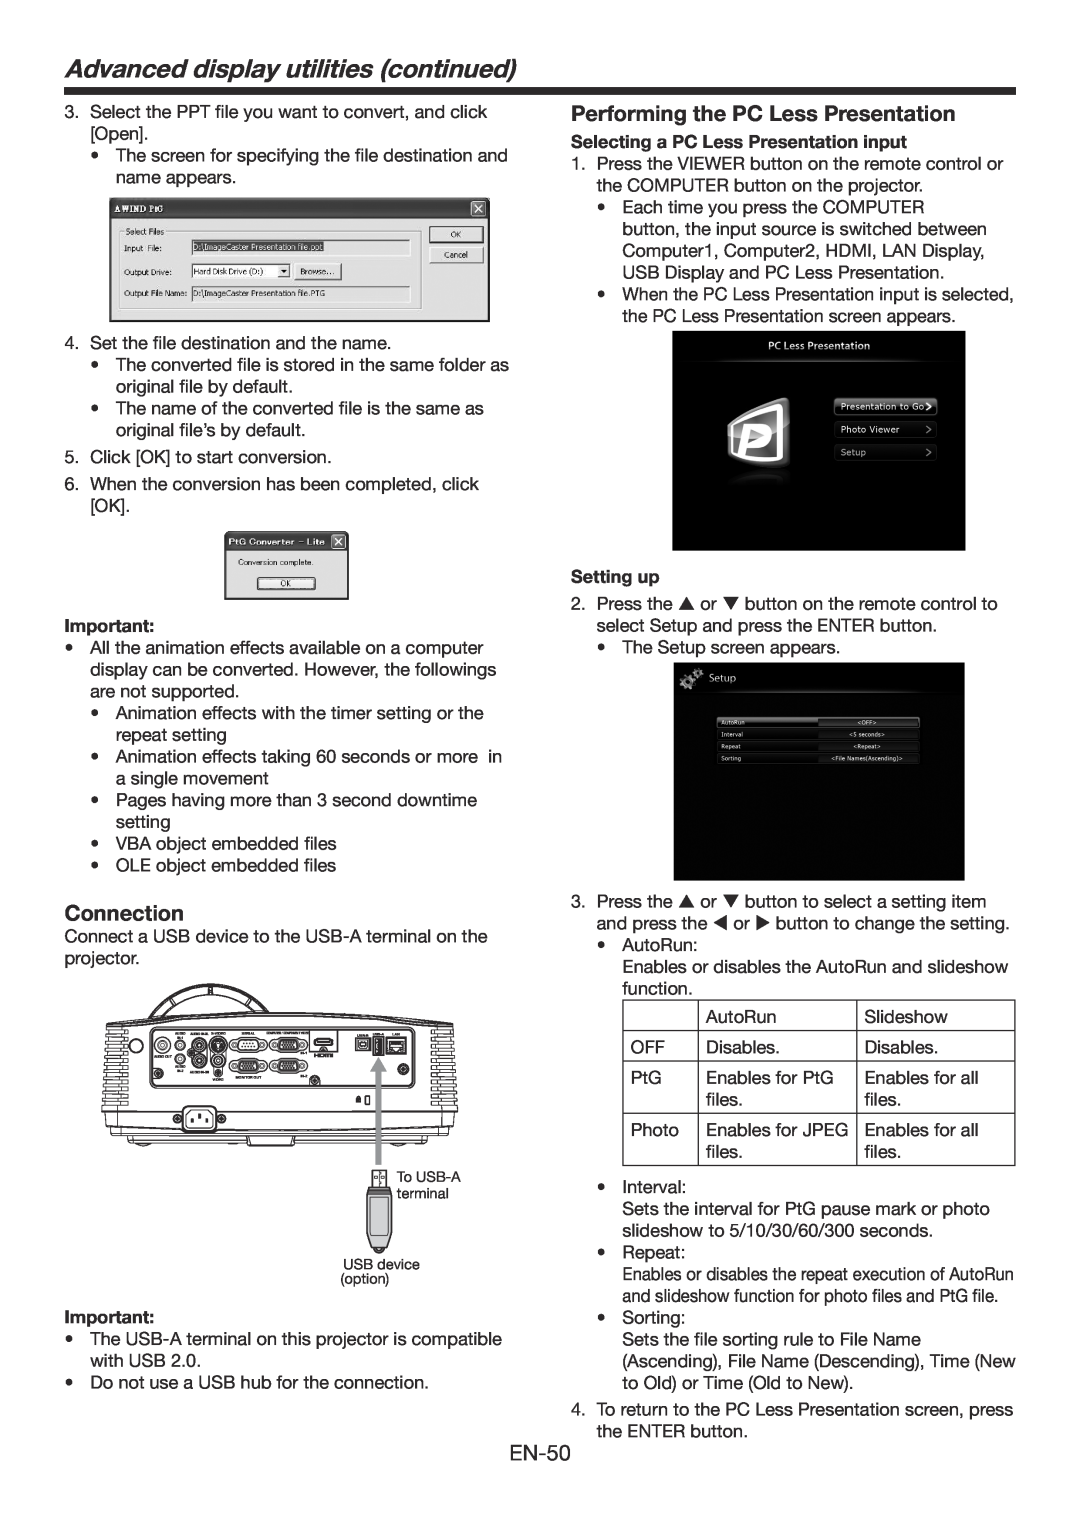 Mitsubishi Electronics WD390U-EST Performing the PC Less Presentation, Advanced display utilities continued, Connection 